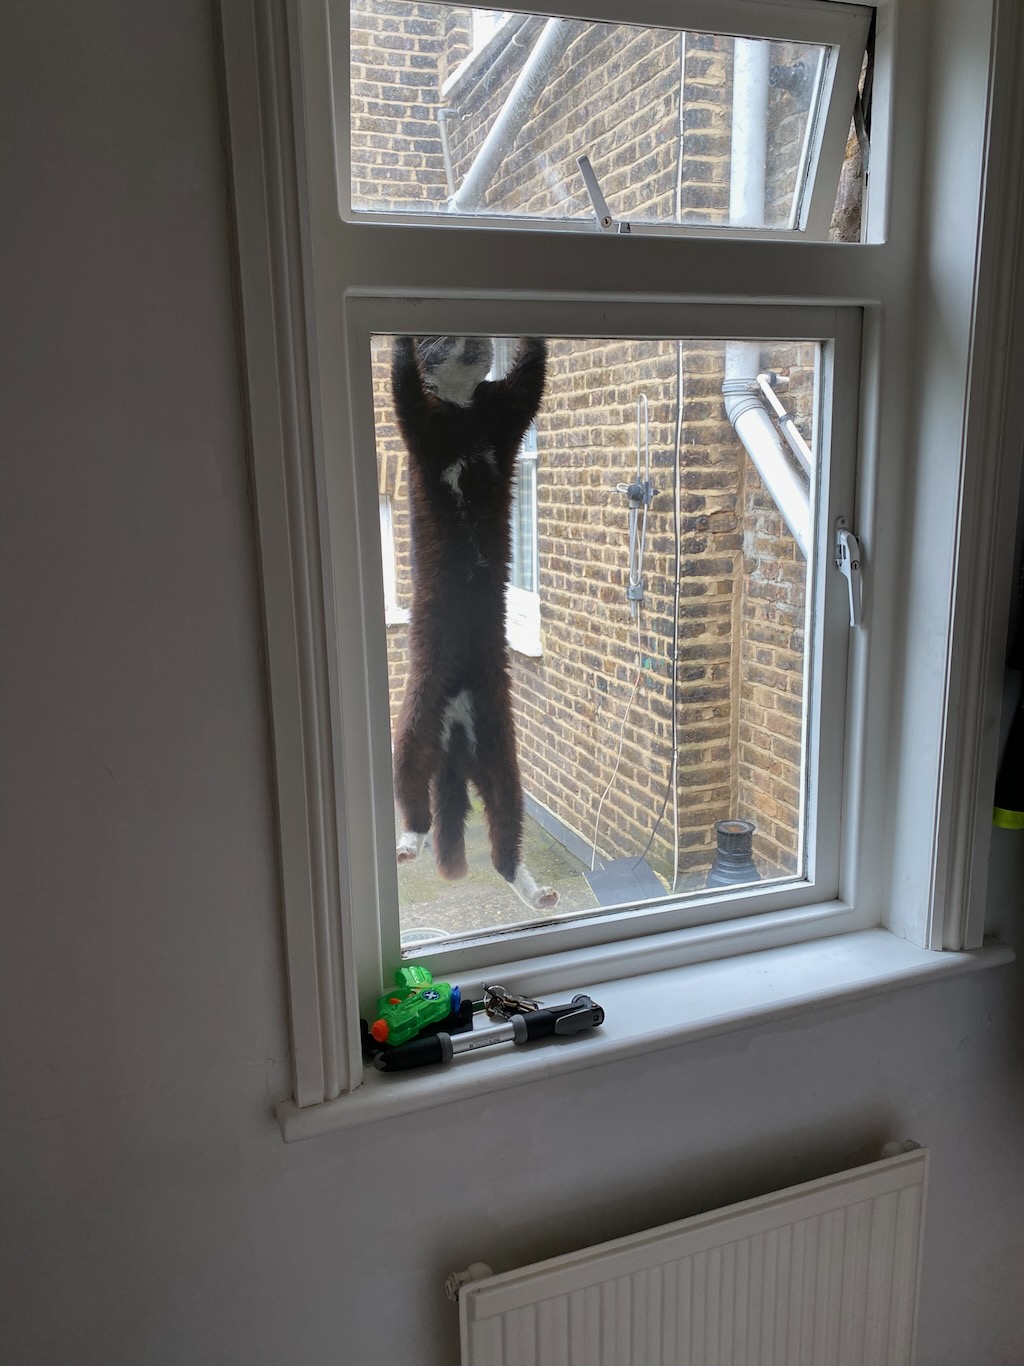 A cat hanging from our window, trying to get in